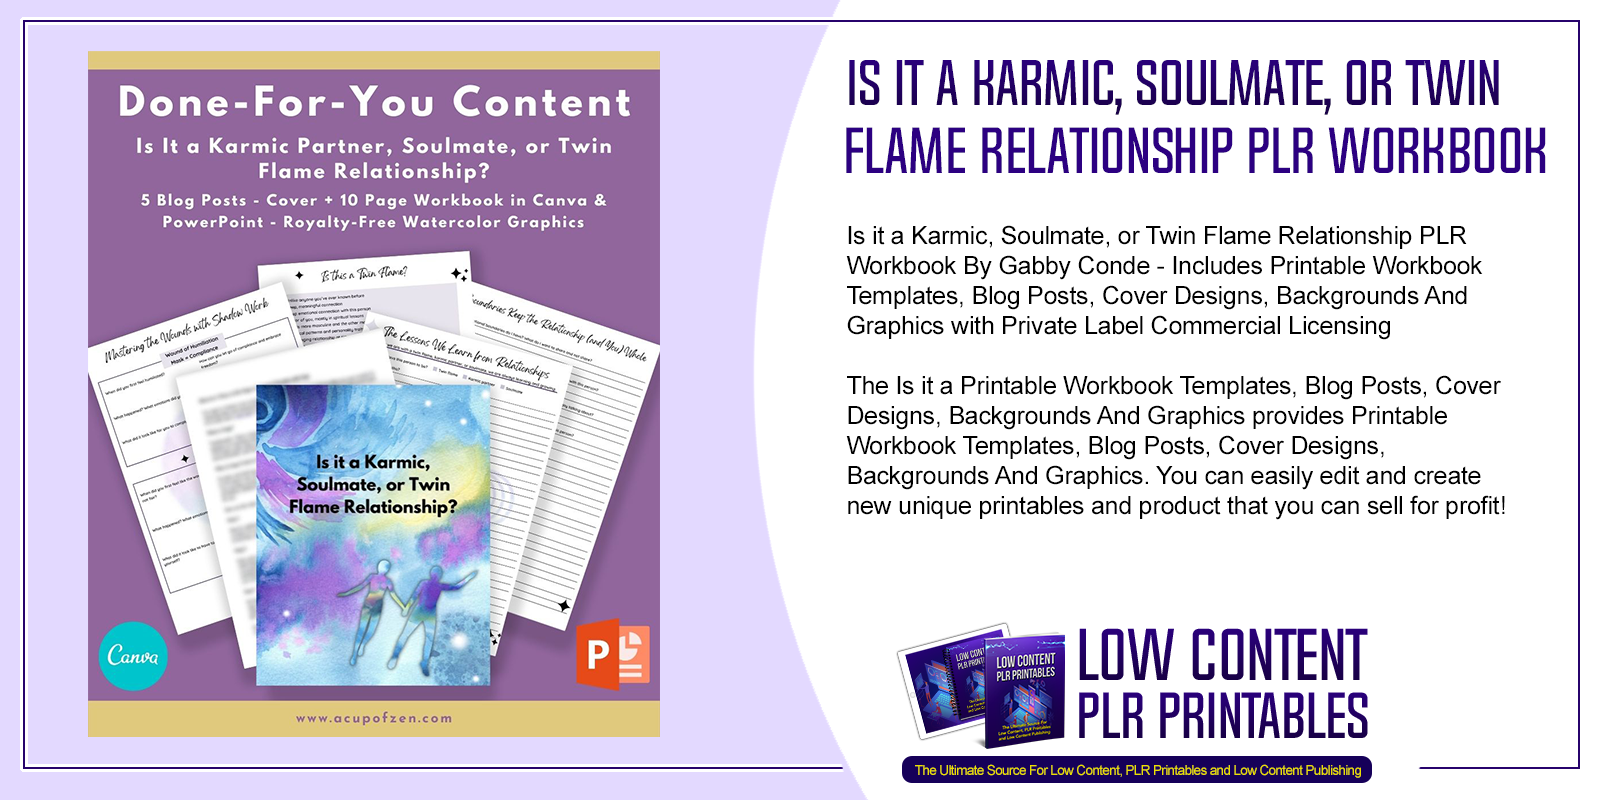 Is it a Karmic Soulmate or Twin Flame Relationship PLR Workbook